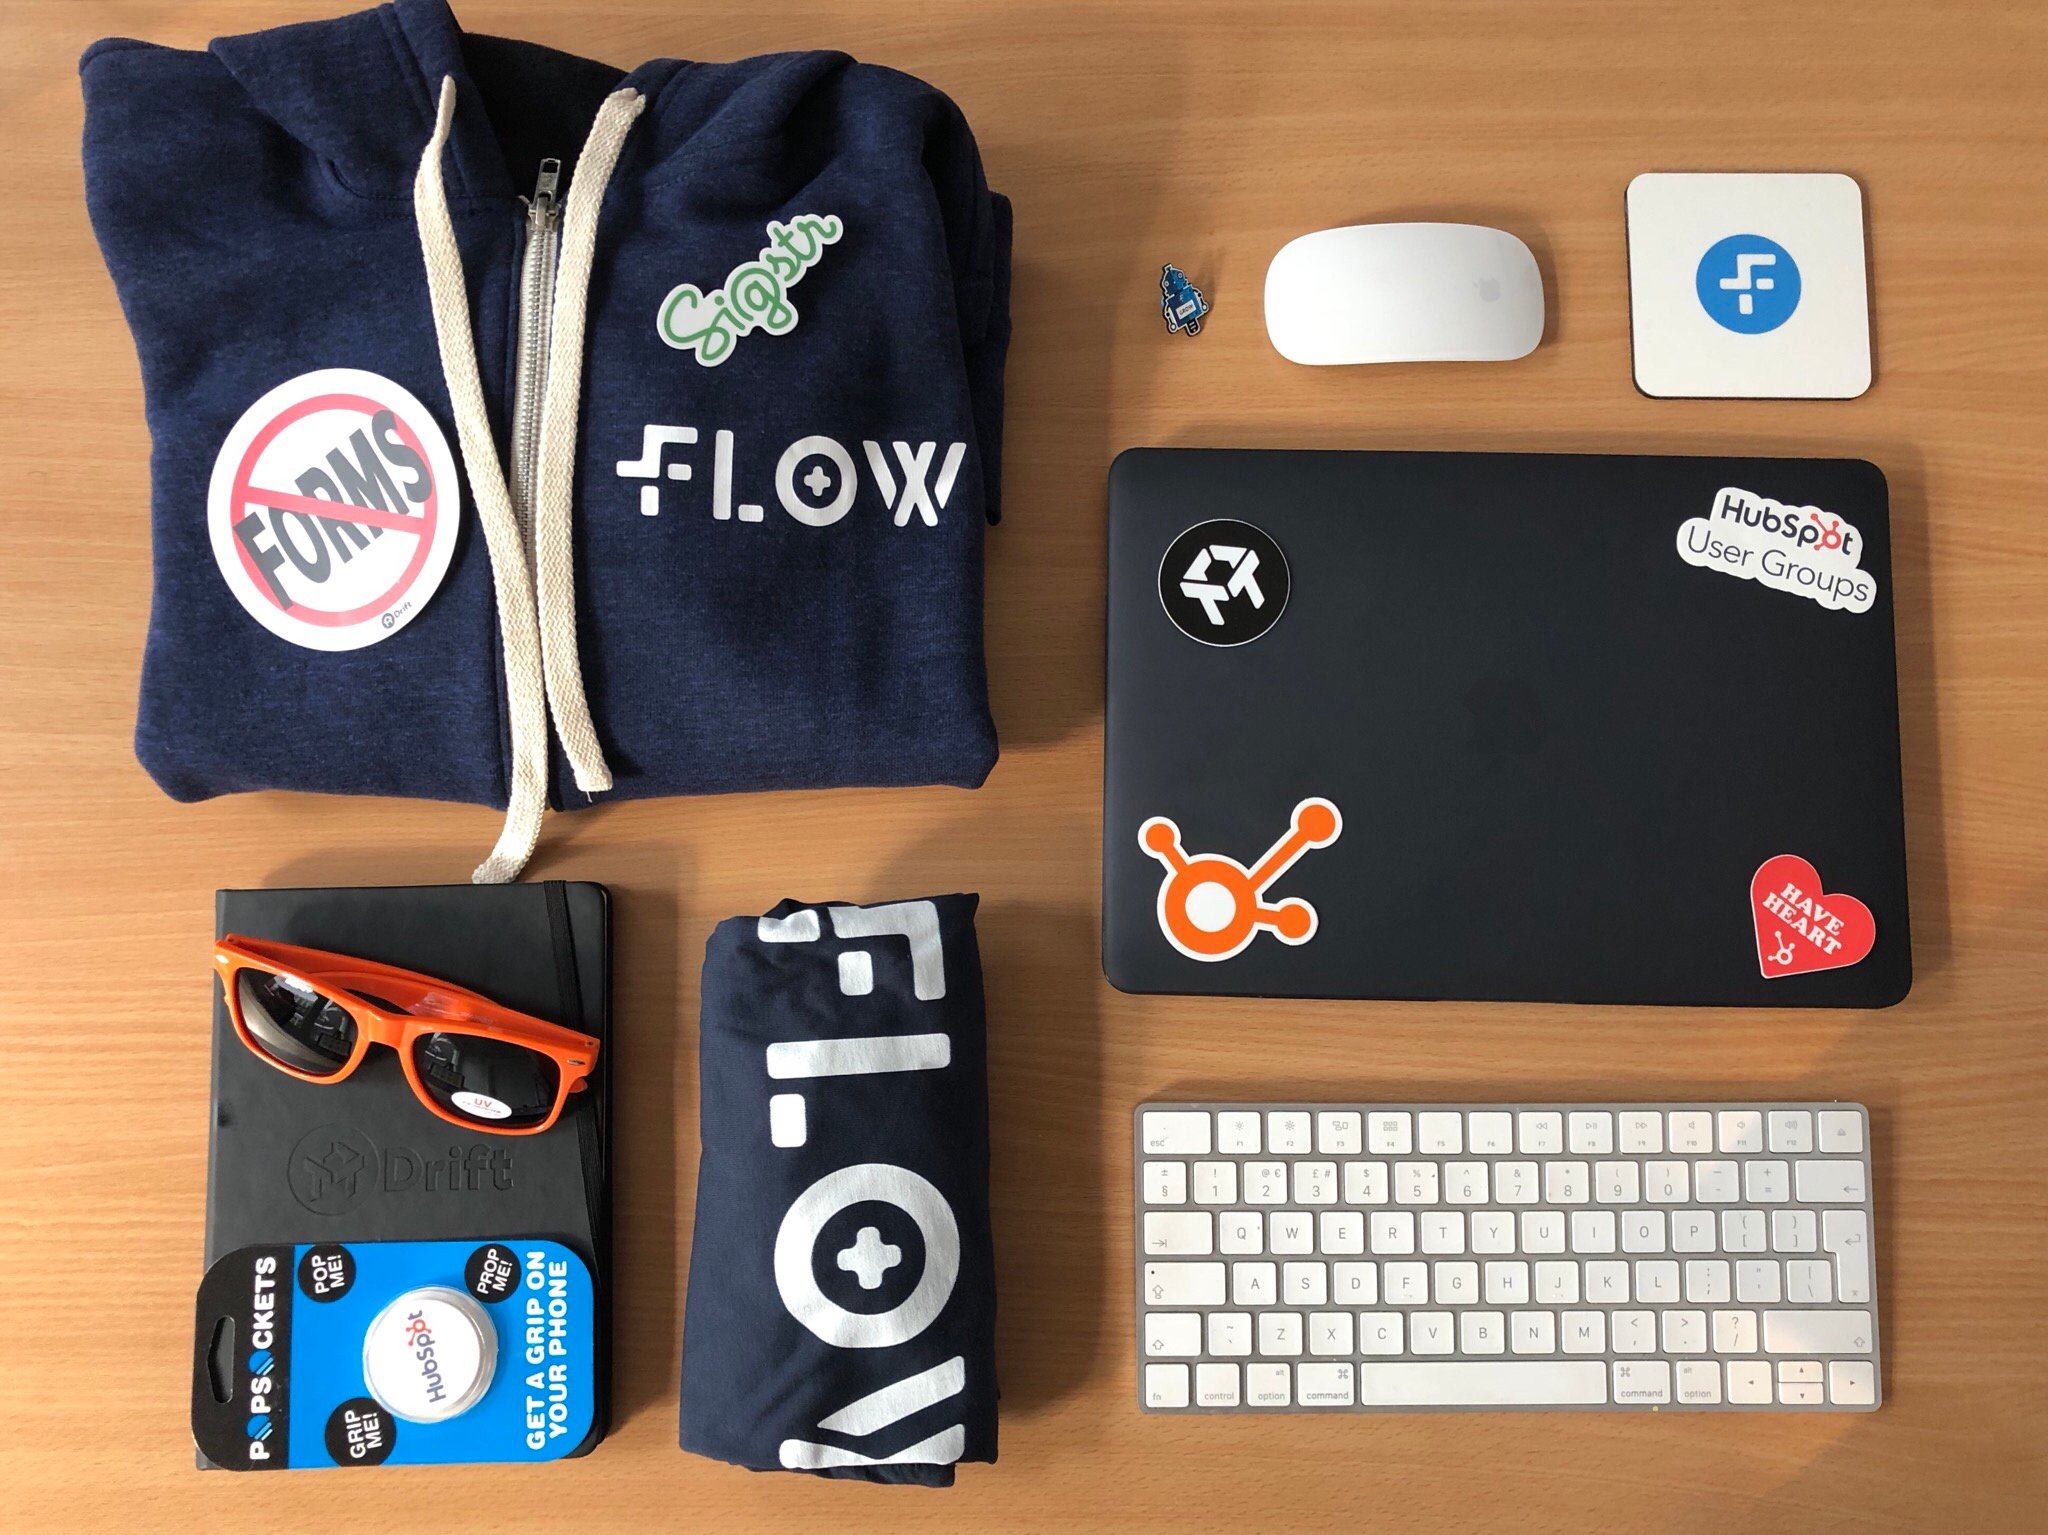 Week one at Six & Flow First impressions from an inbound strategist